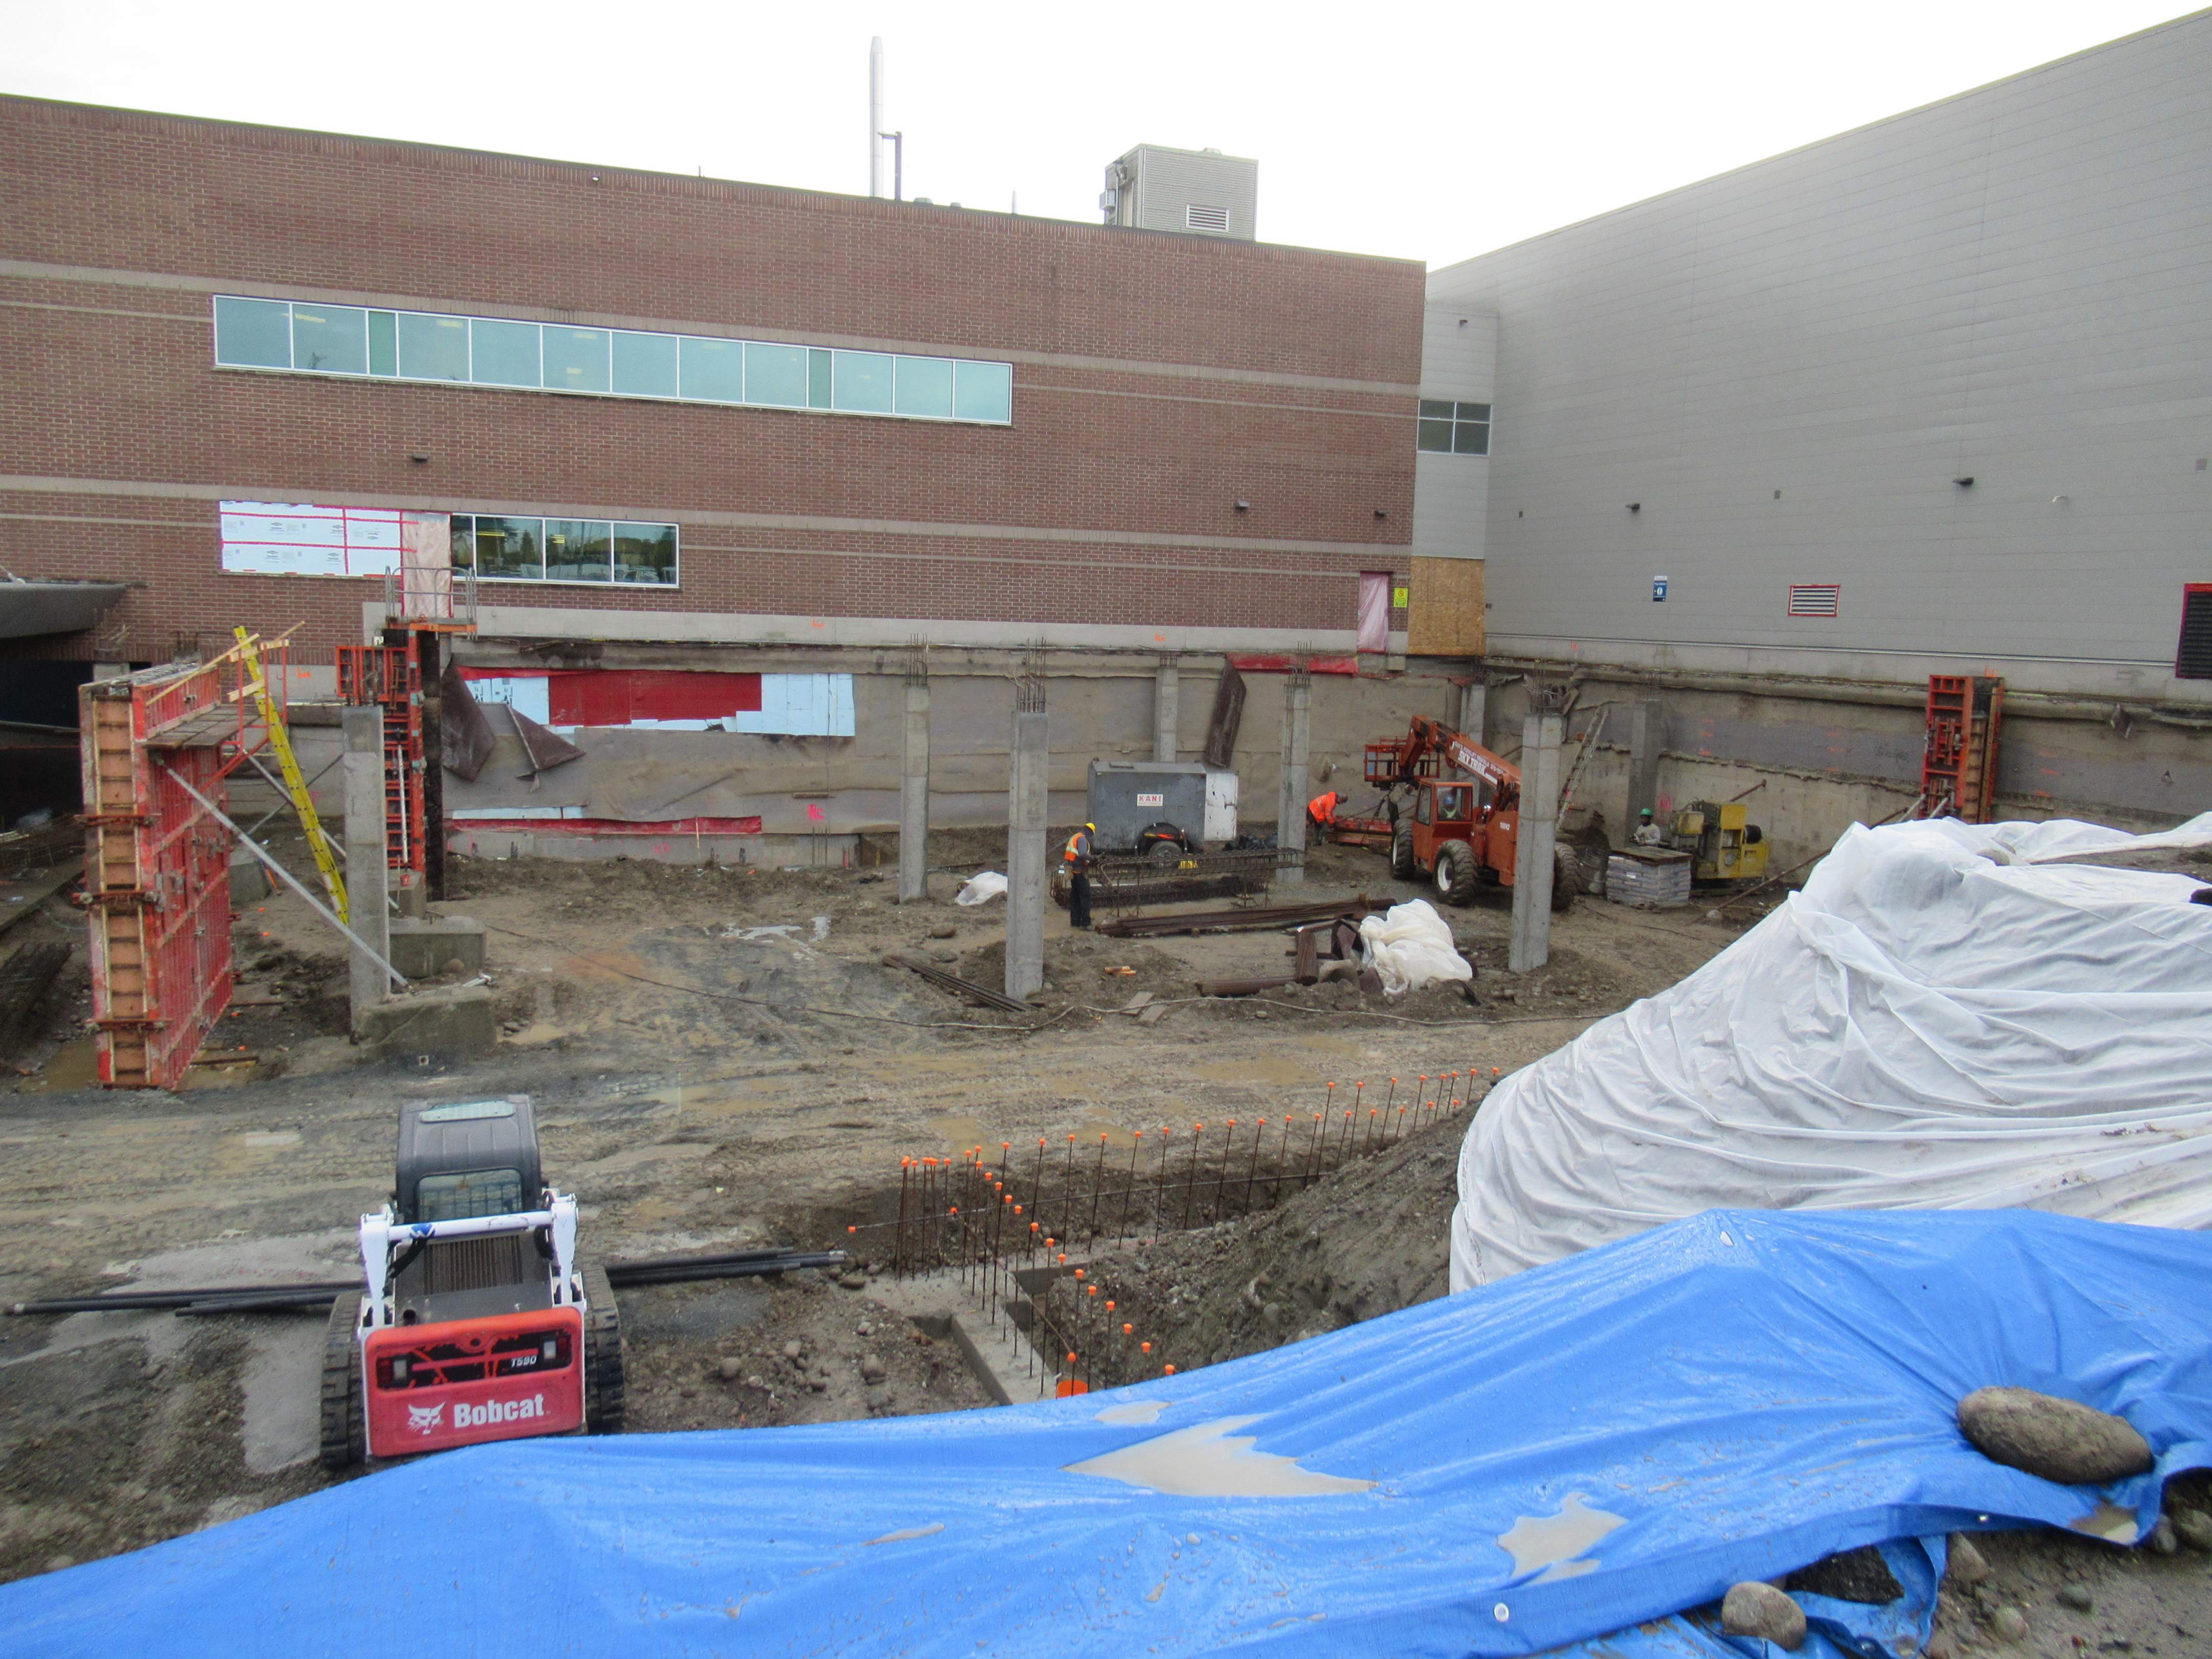 Crews in a deep excavation zone work on foundation of an extended area to the emergency department – 12/16/19